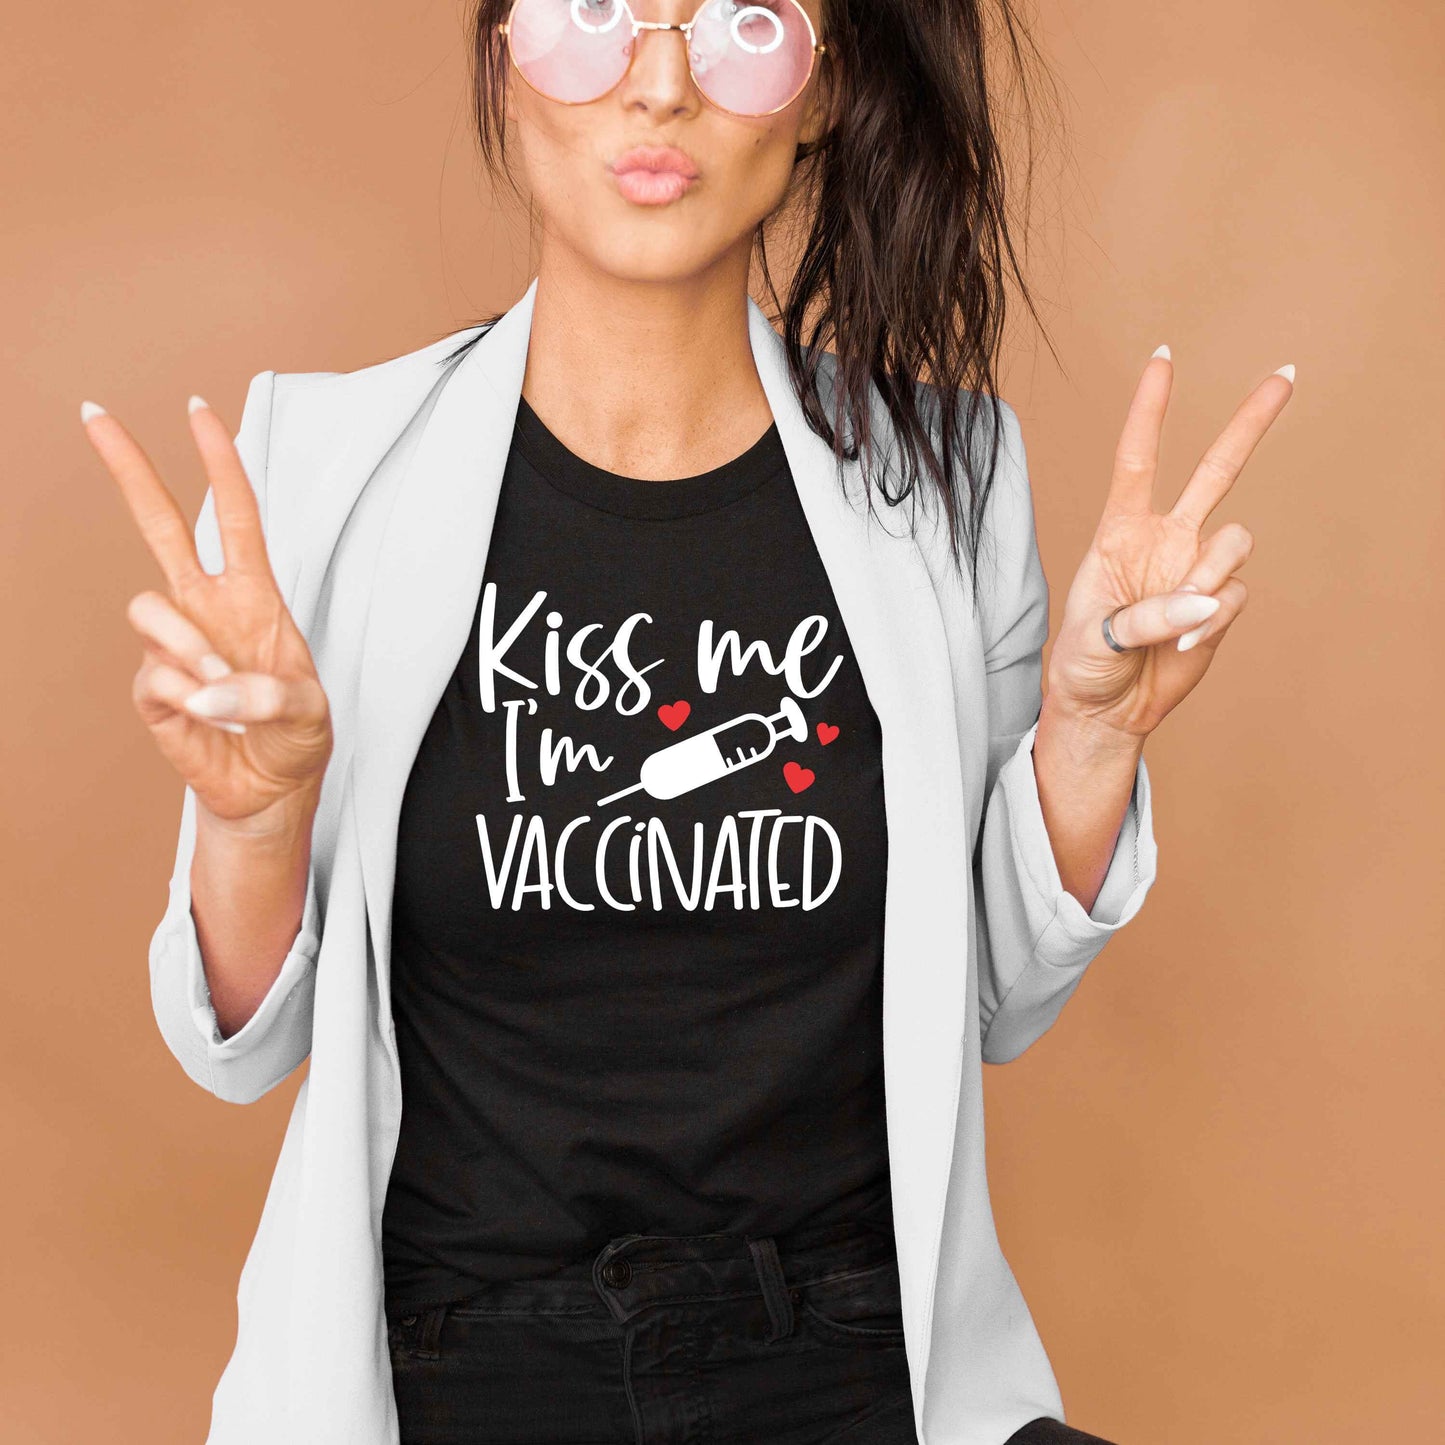 Kiss Me, I'm Vaccinated unisex t-shirt • super soft tees for women • vaccinated shirt • proudly vaccinated